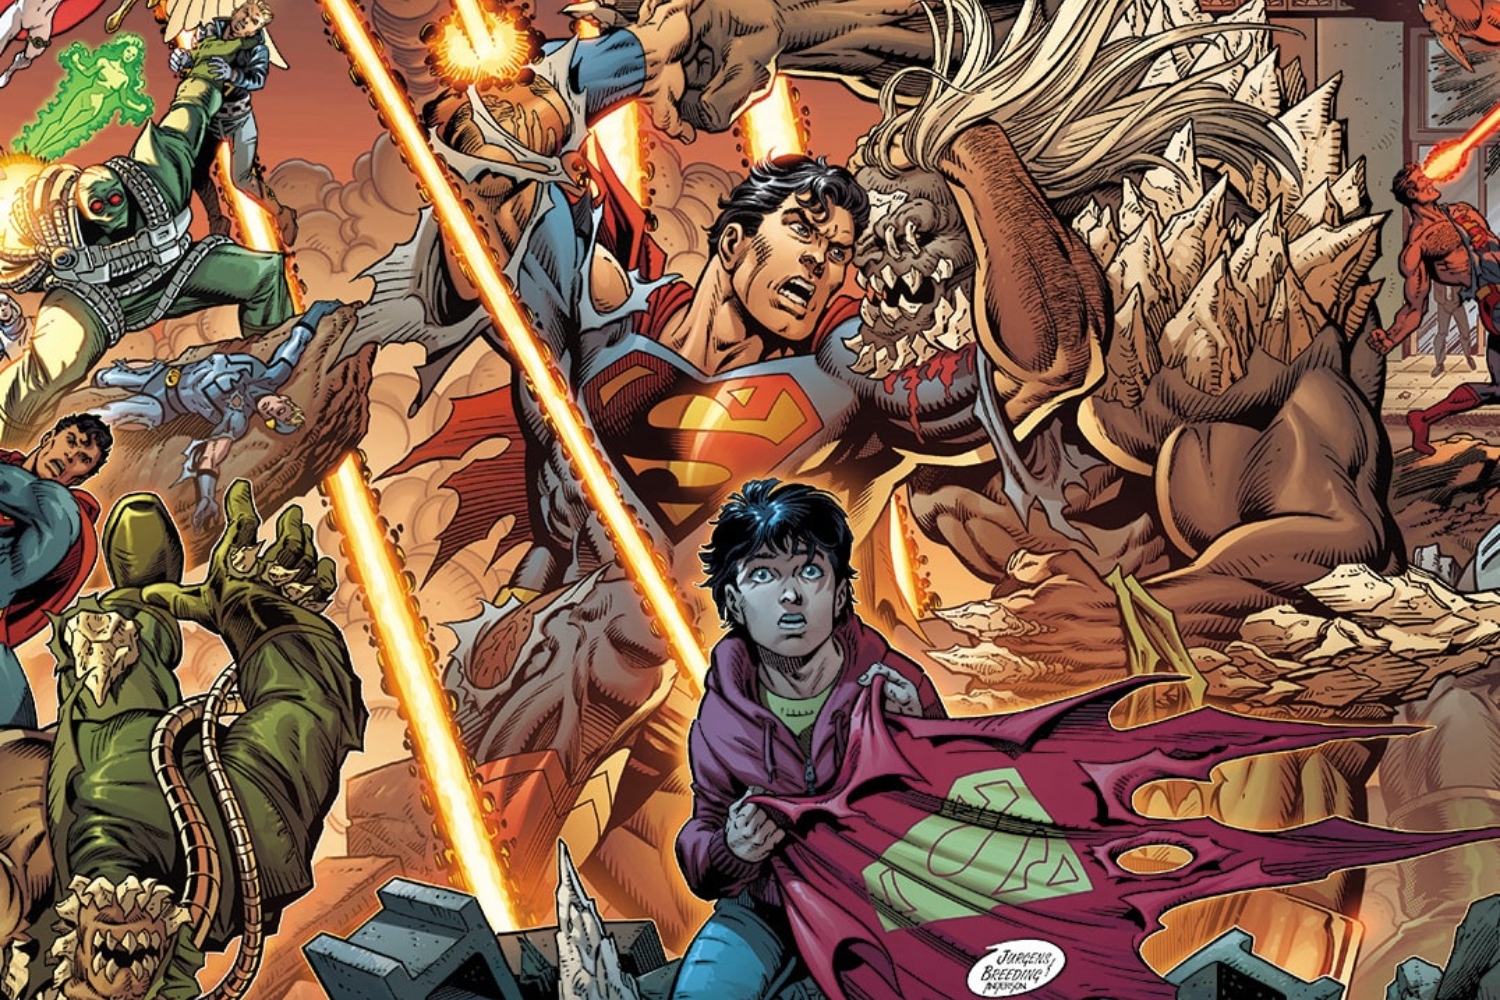 On going home again: Dan Jurgens reflects on 'The Death of Superman 30th Anniversary Special'